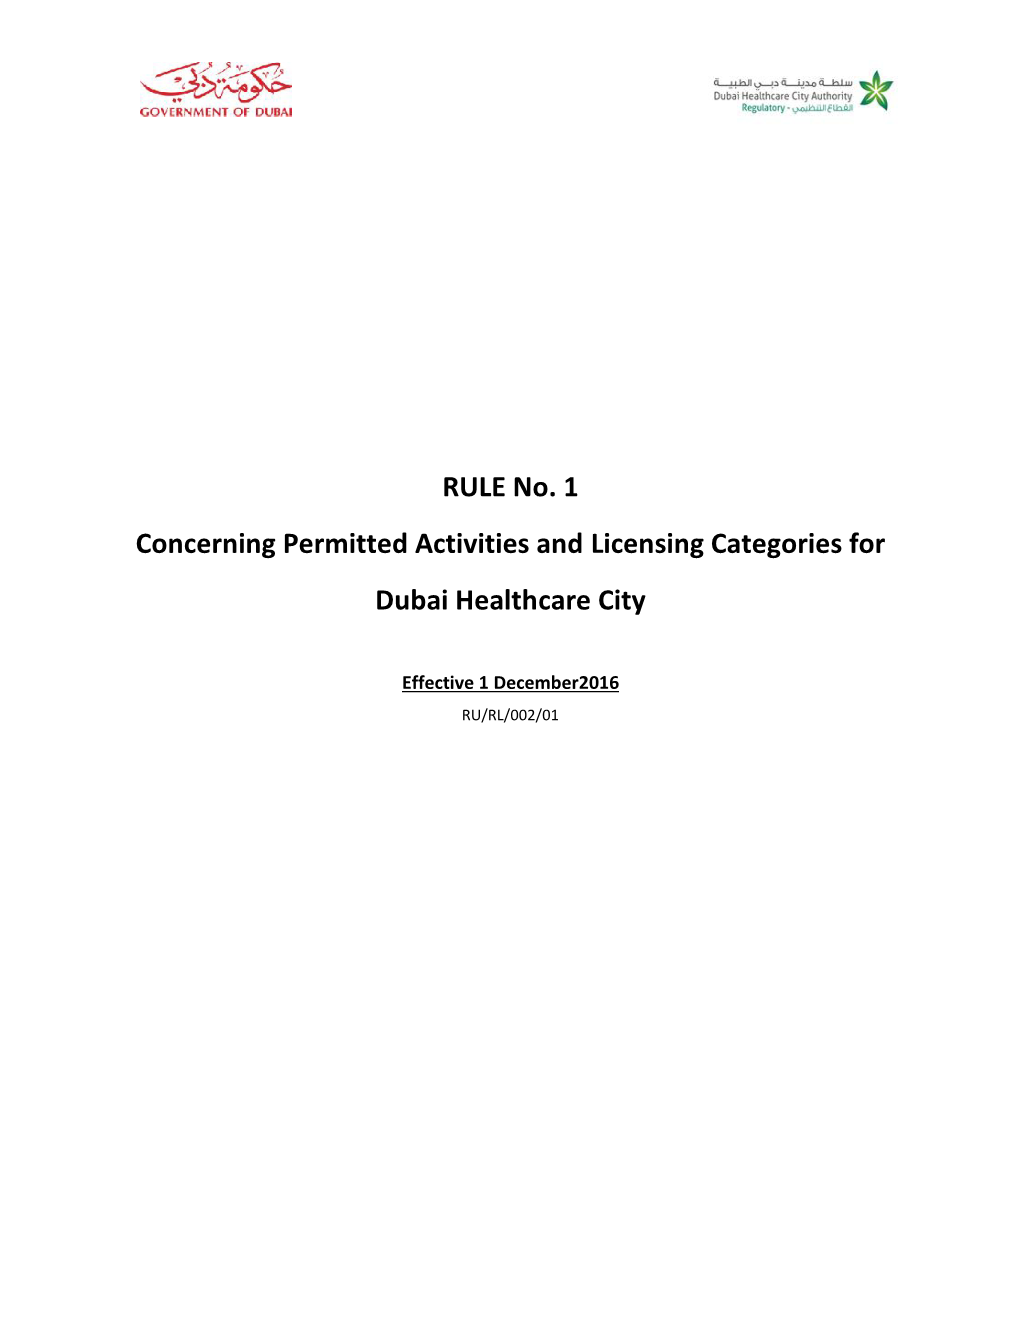 RULE No. 1 Concerning Permitted Activities and Licensing Categories for Dubai Healthcare City